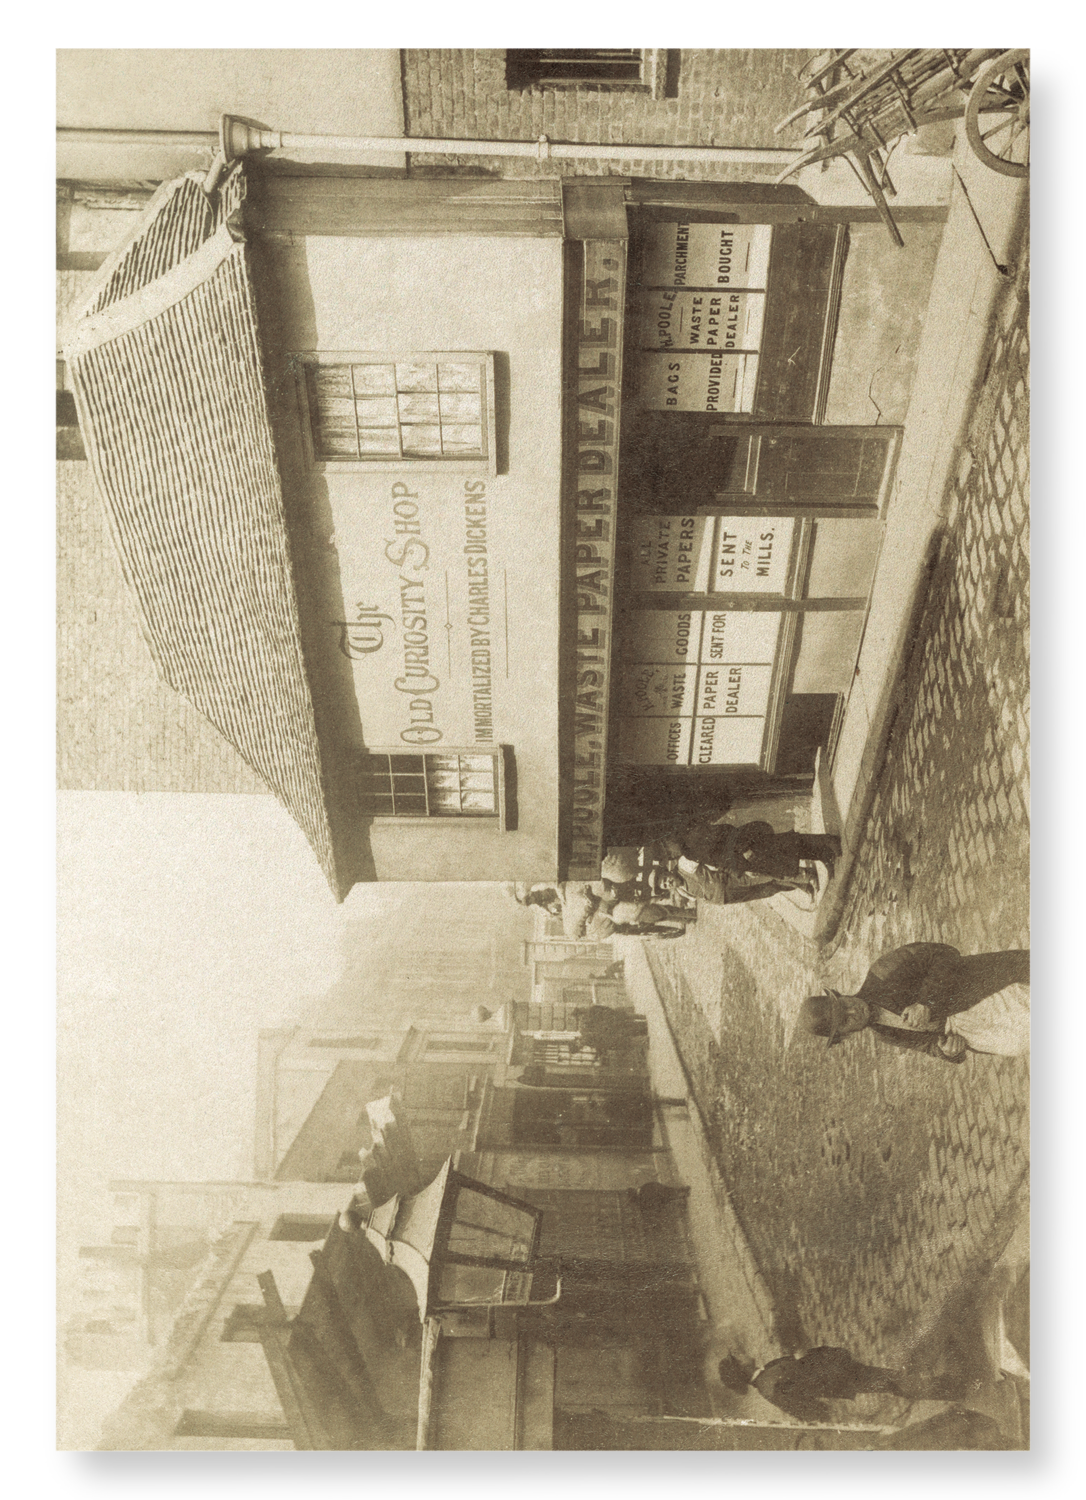 THE OLD CURIOSITY SHOP (17TH MAY 1894): Photo Art Print